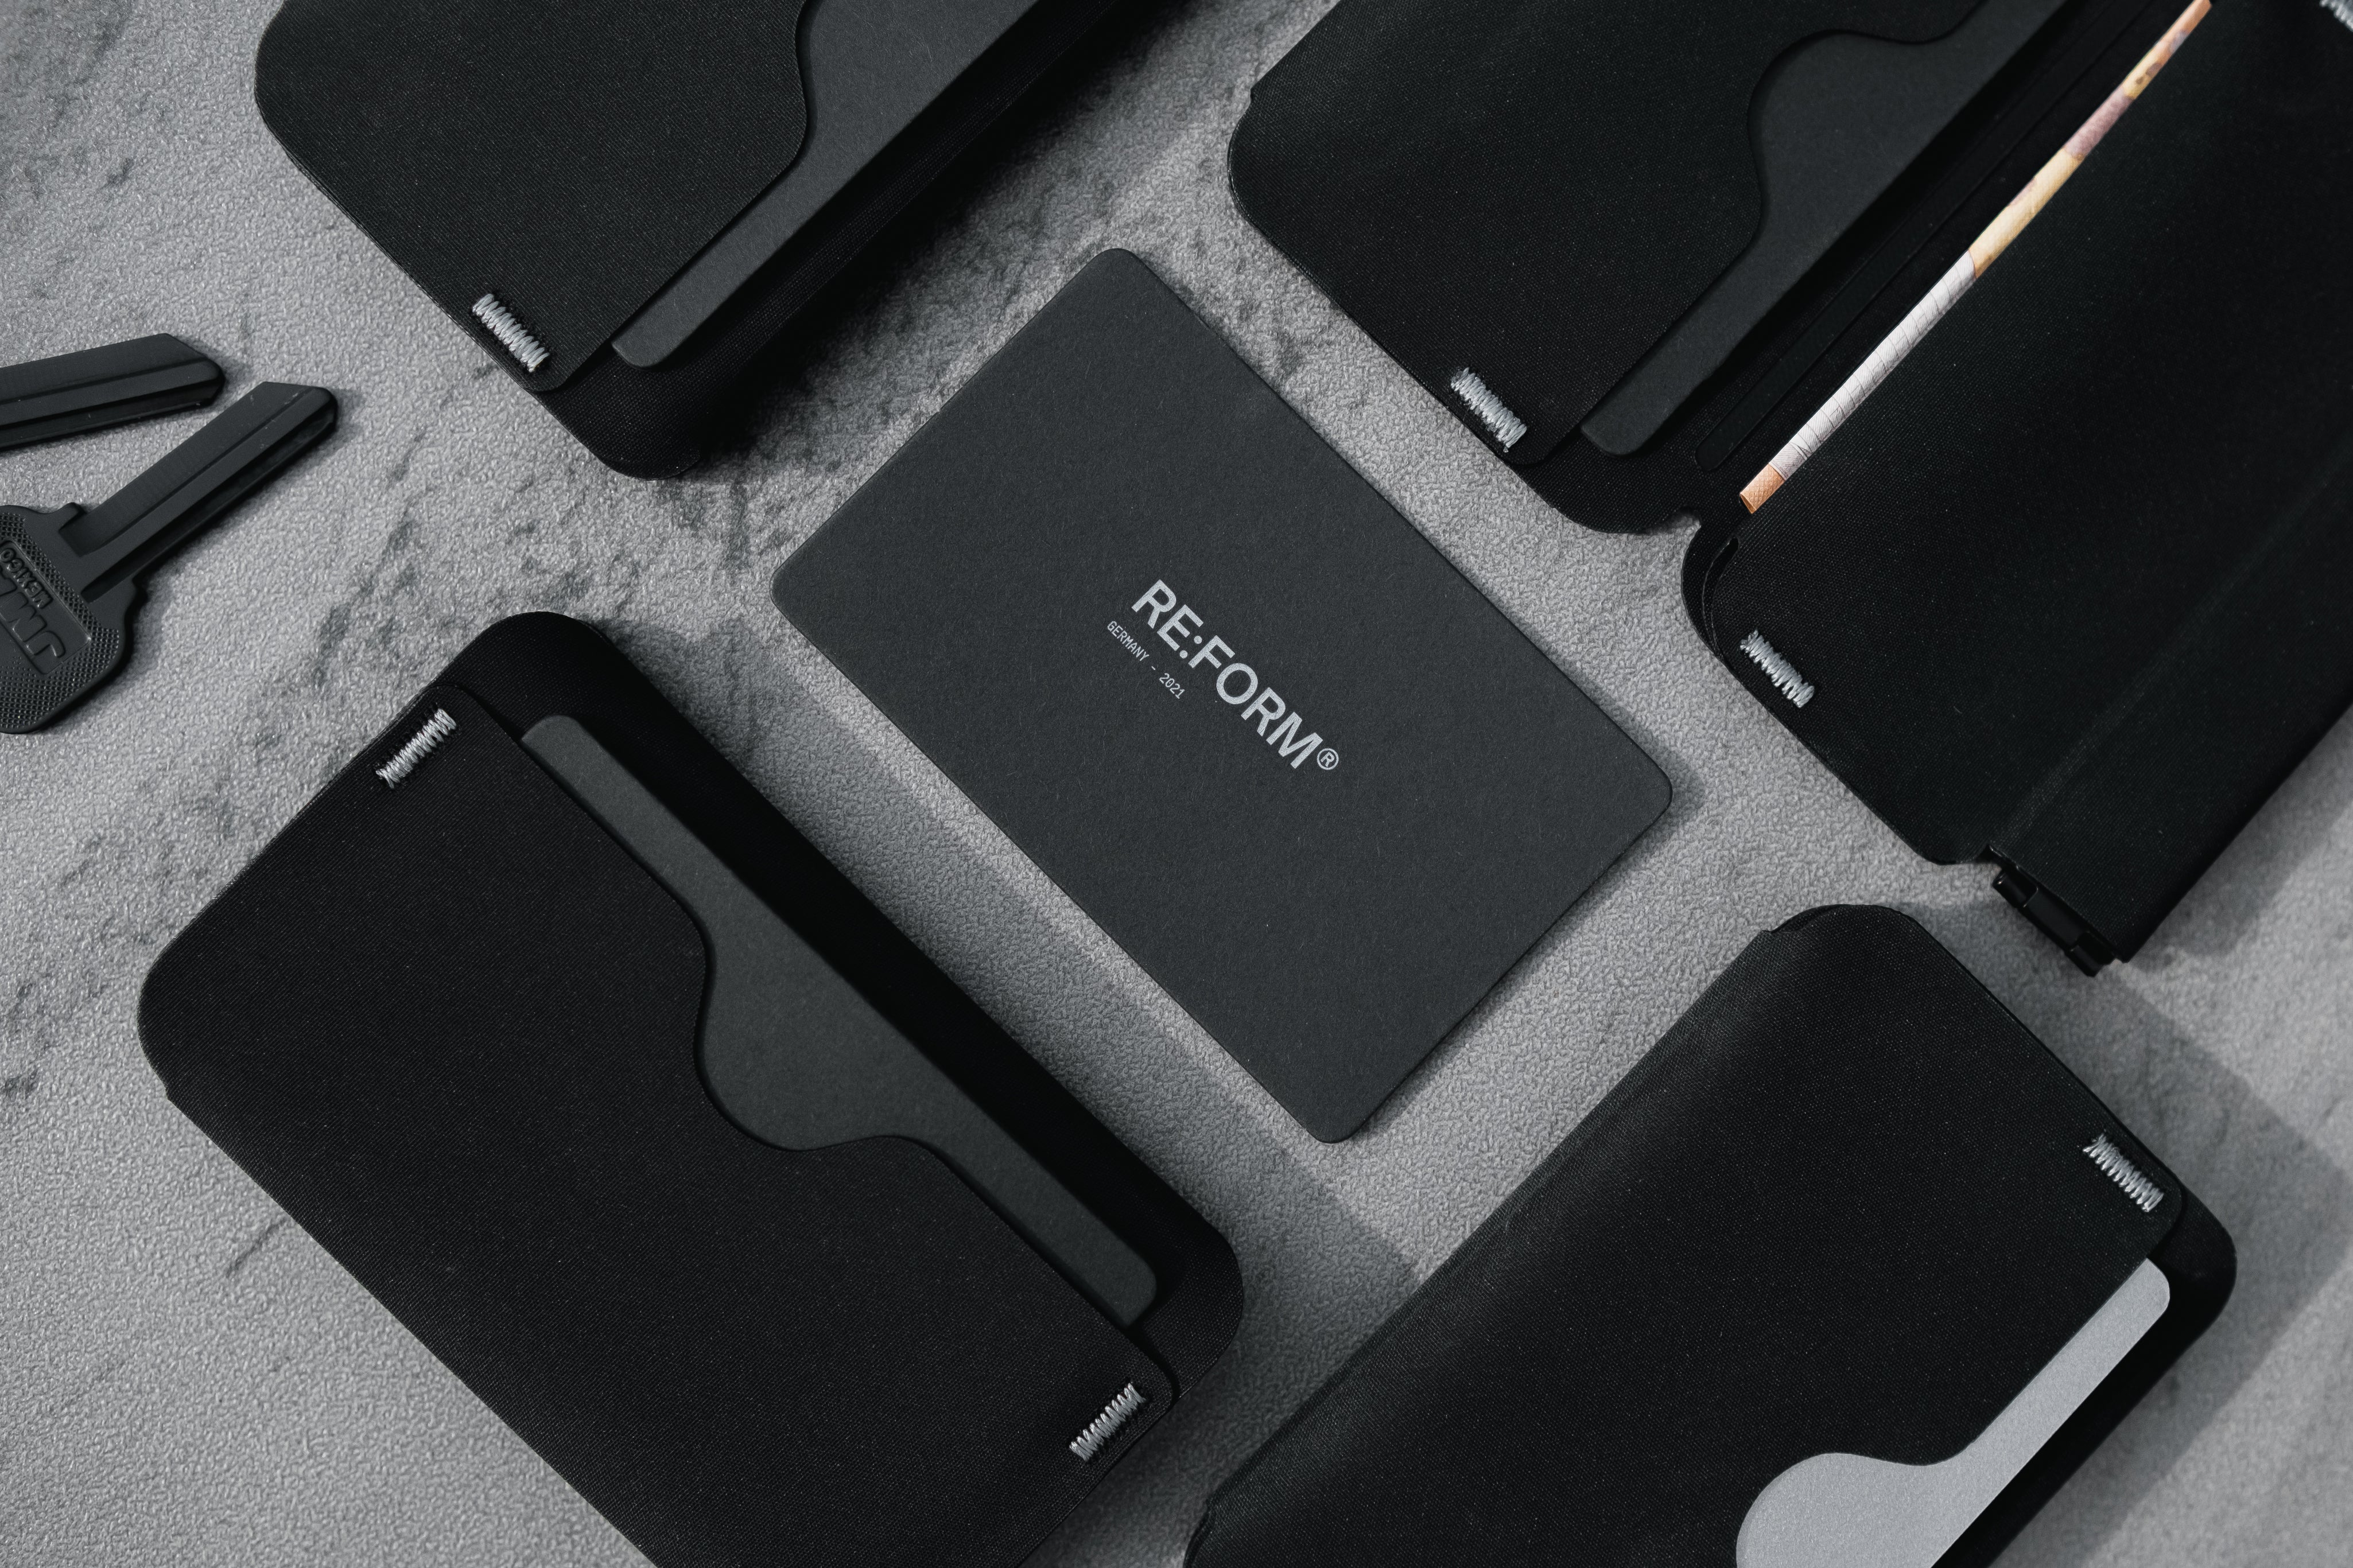 RE:FORM Minimalist Wallets Hold Coins, Cards, Bills, AirTag and Key